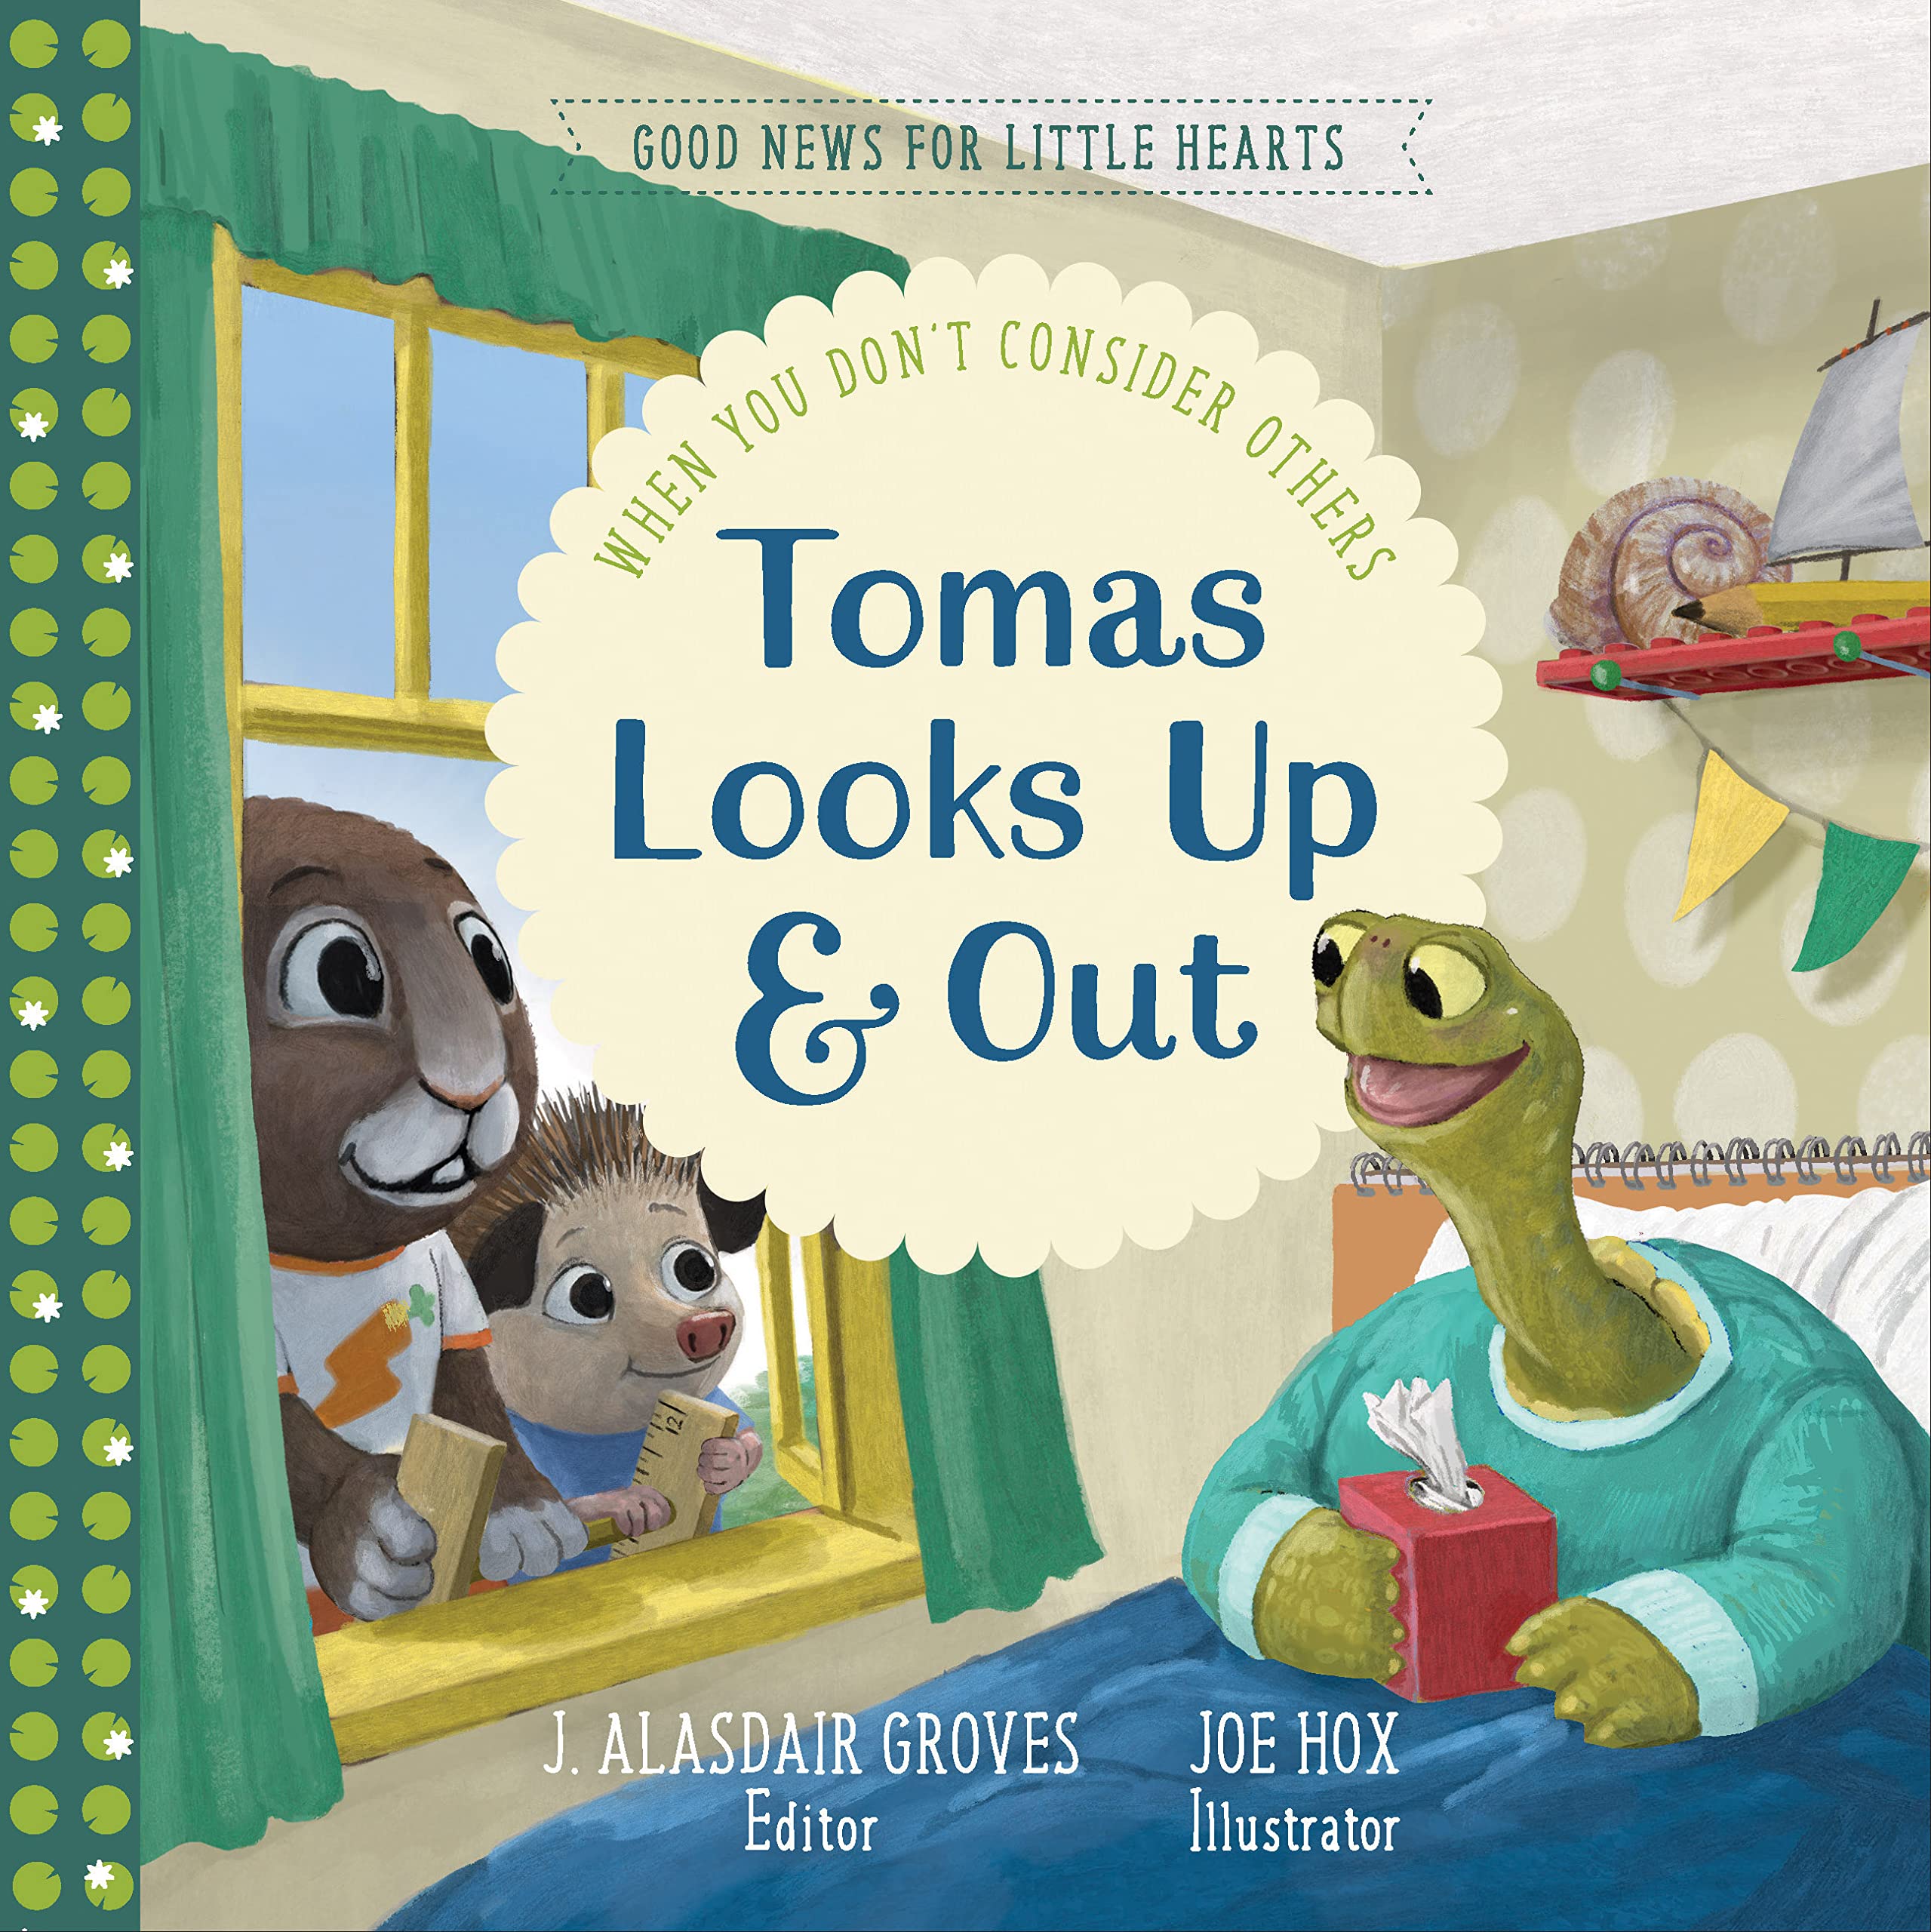 Tomas Looks Up and Out: When You Don't Consider Others (Good News for Little Hearts)